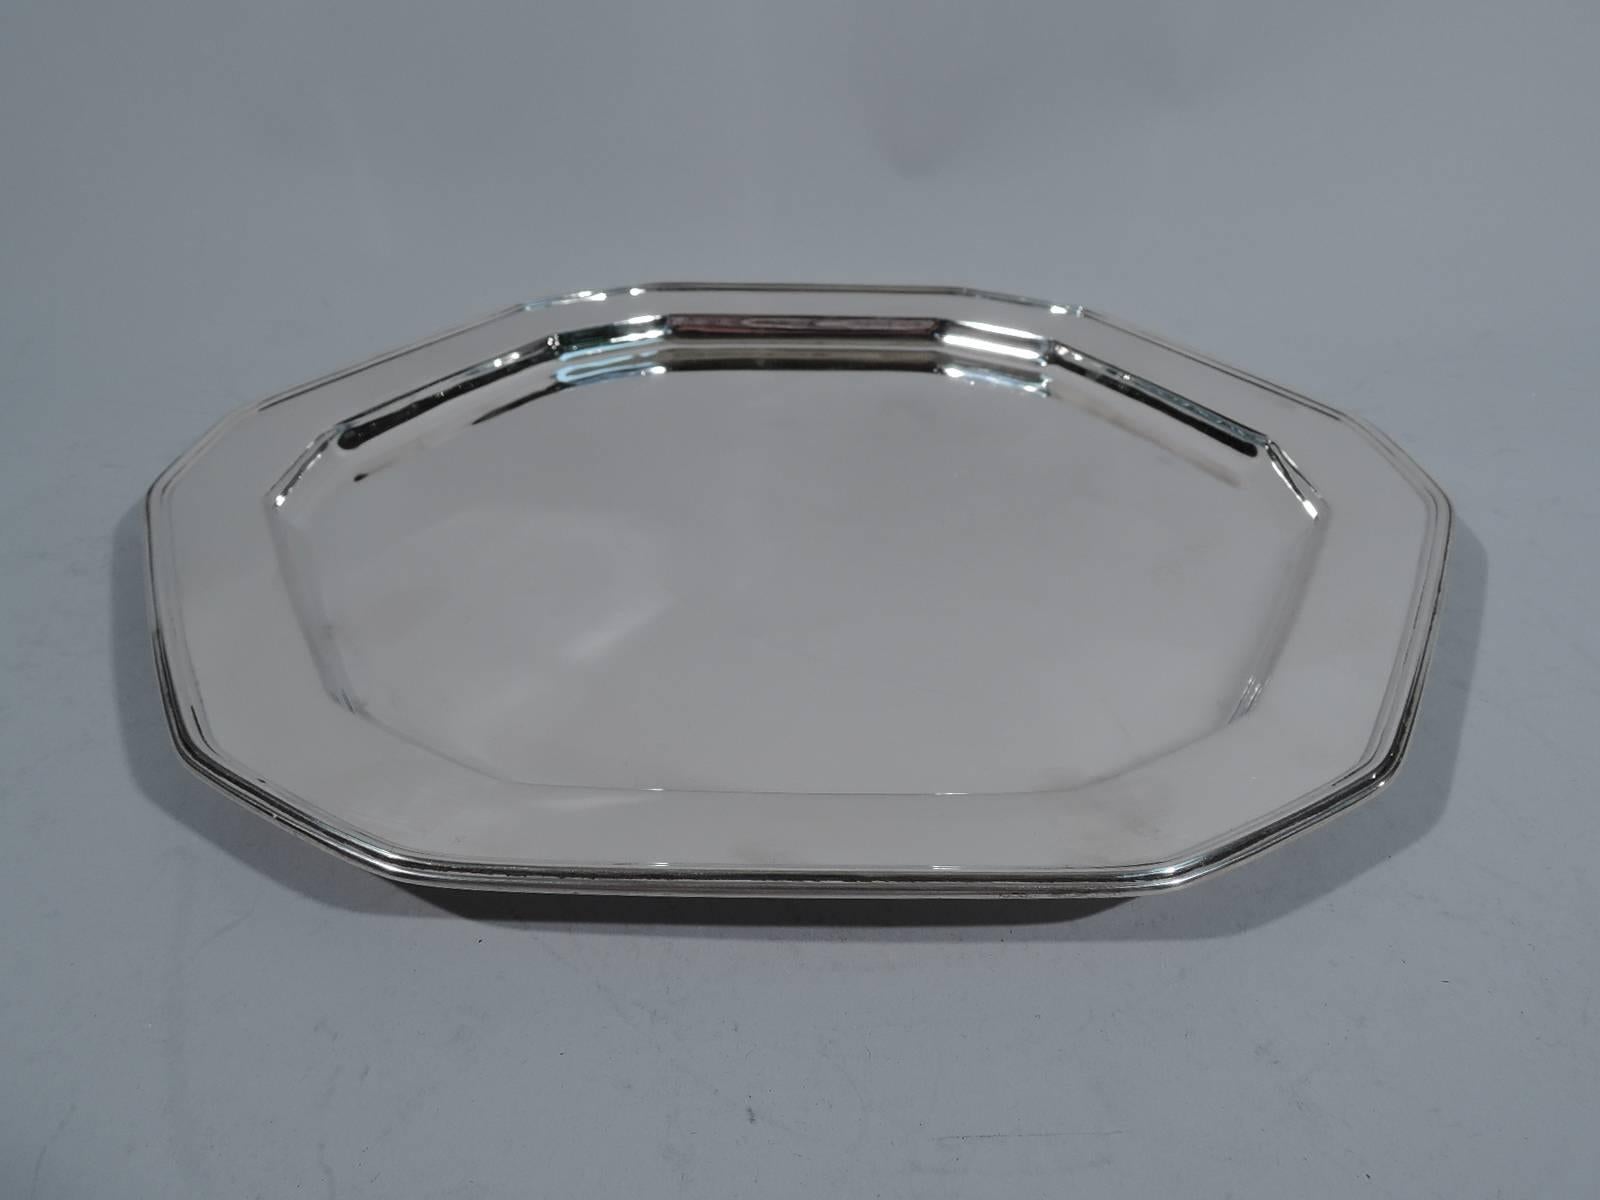 Sterling silver tray. Made by Tiffany & Co. in New York, circa 1917. Chamfered hexagon with well and molded rim. A striking geometric design. Hallmark includes pattern no. 19242 (first produced in 1917) and director’s letter m